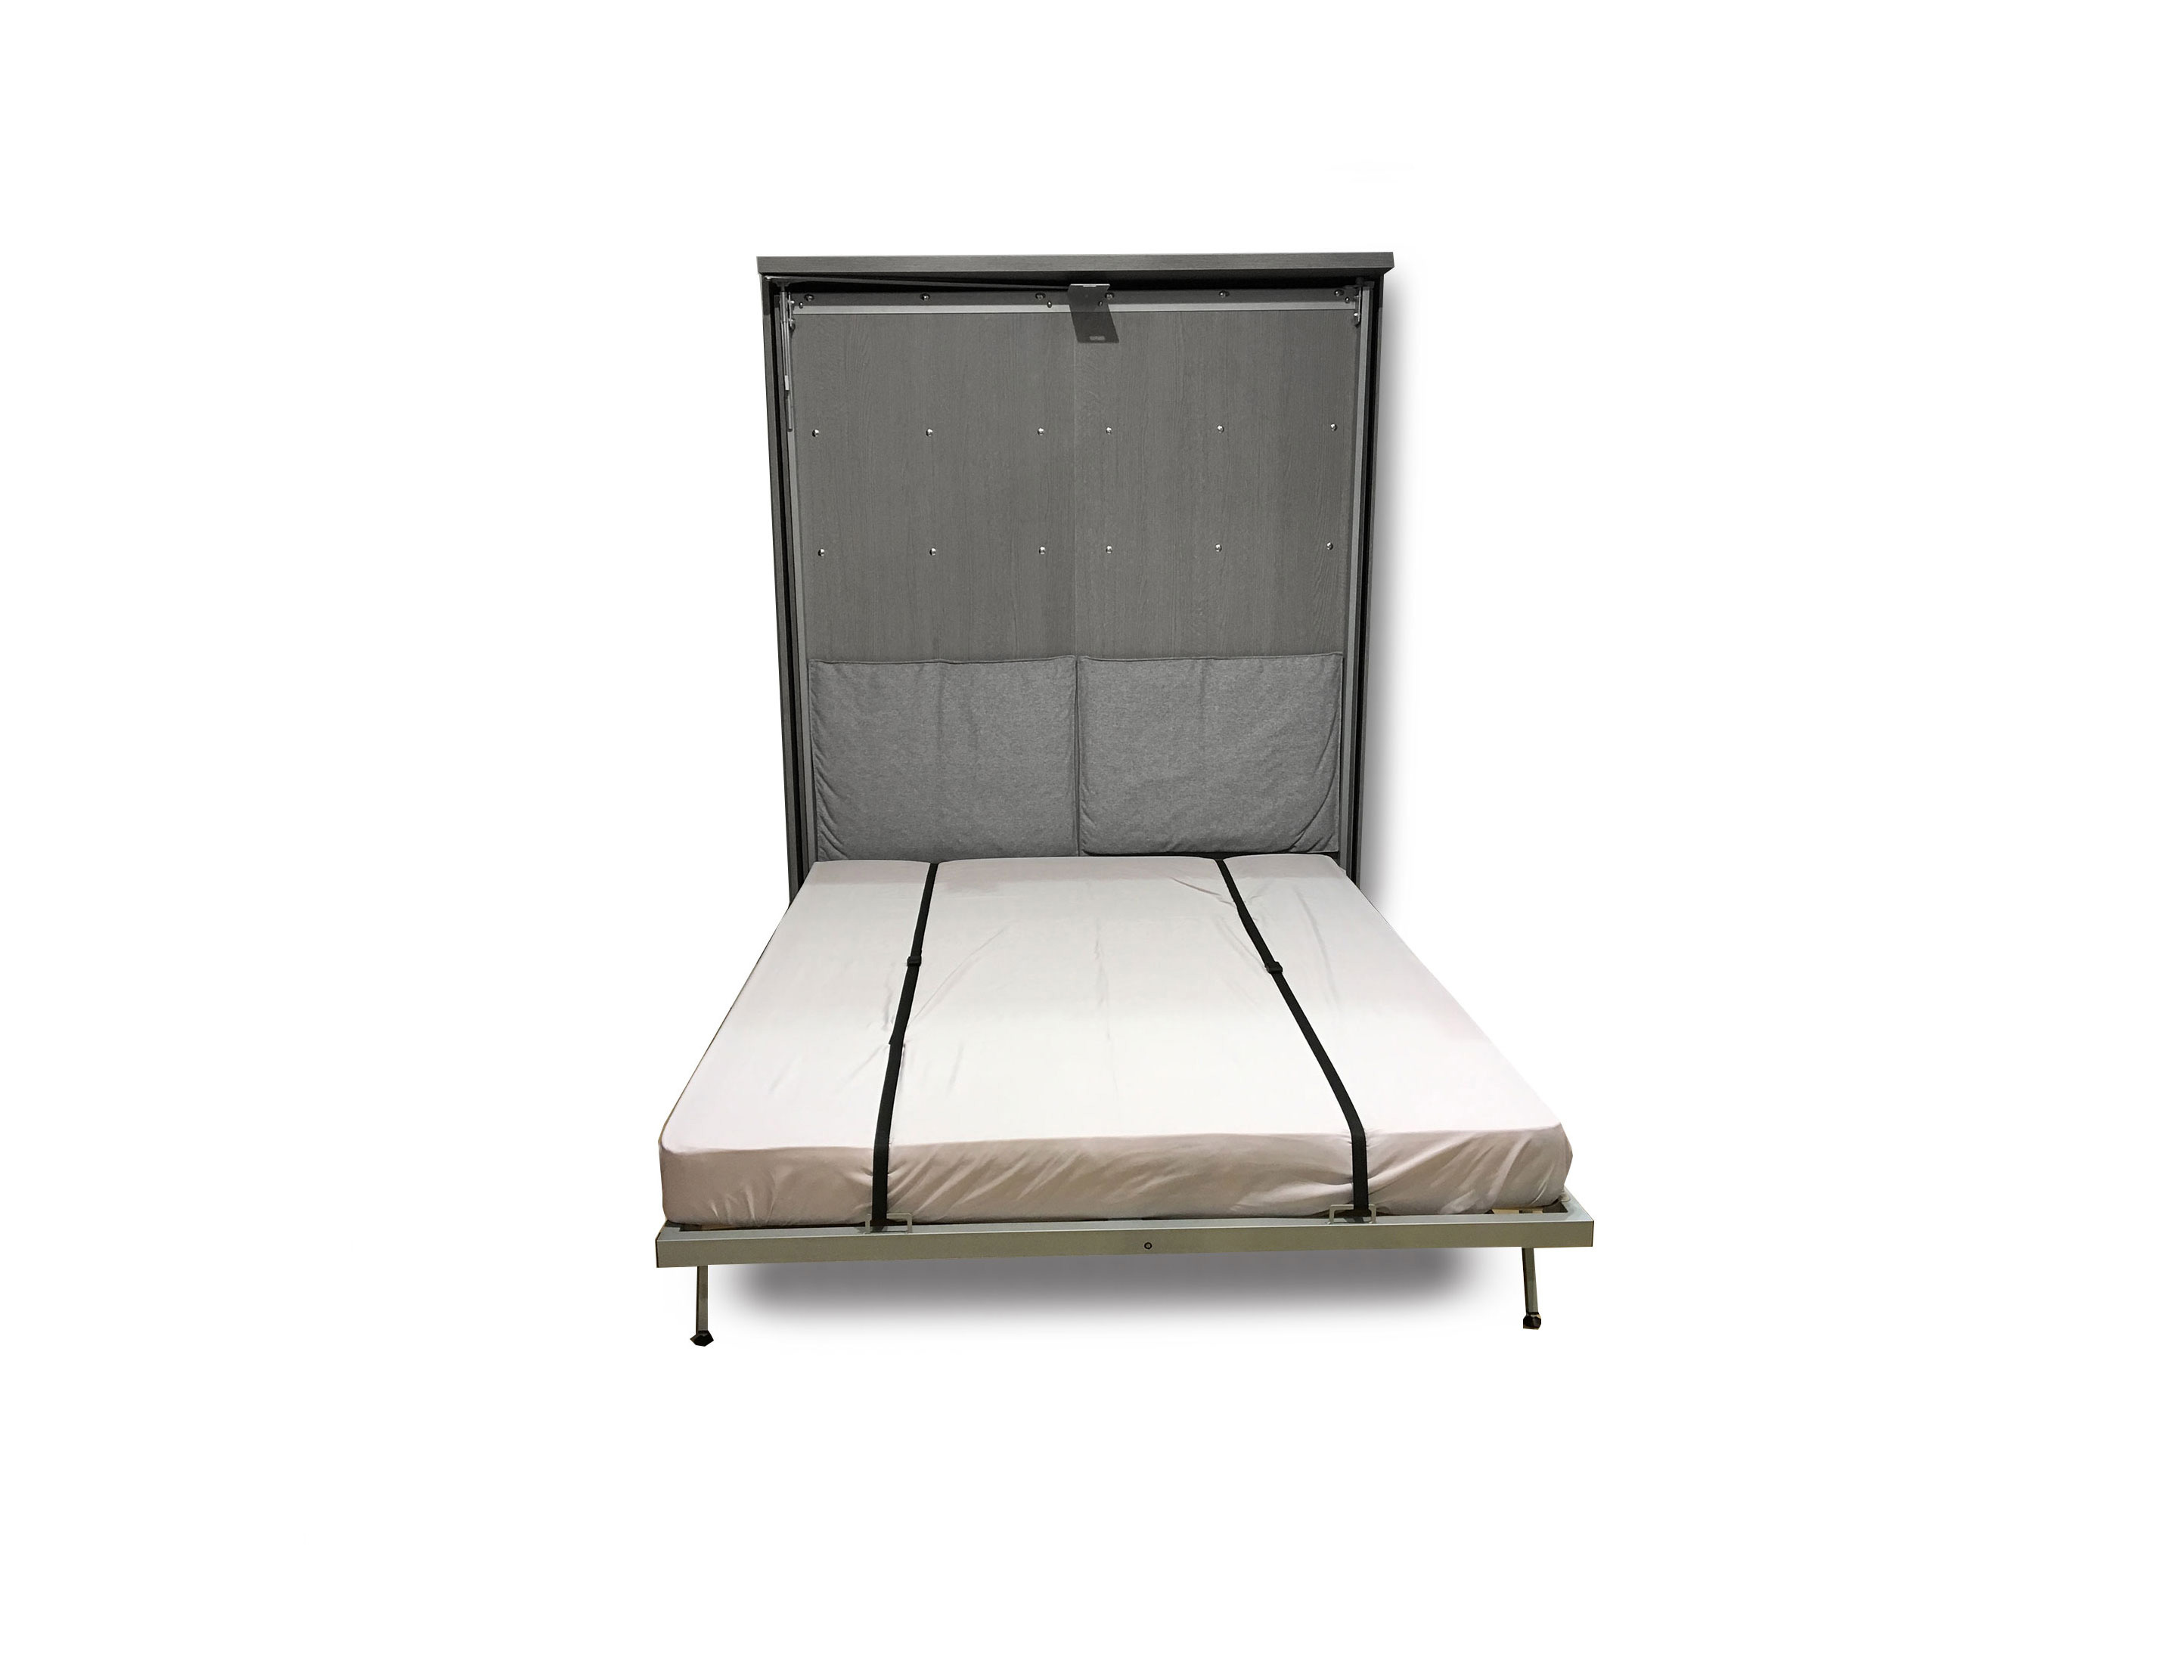 Compatto – Freestanding Wall Bed Sofa - Expand Furniture - Folding Tables,  Smarter Wall Beds, Space Savers